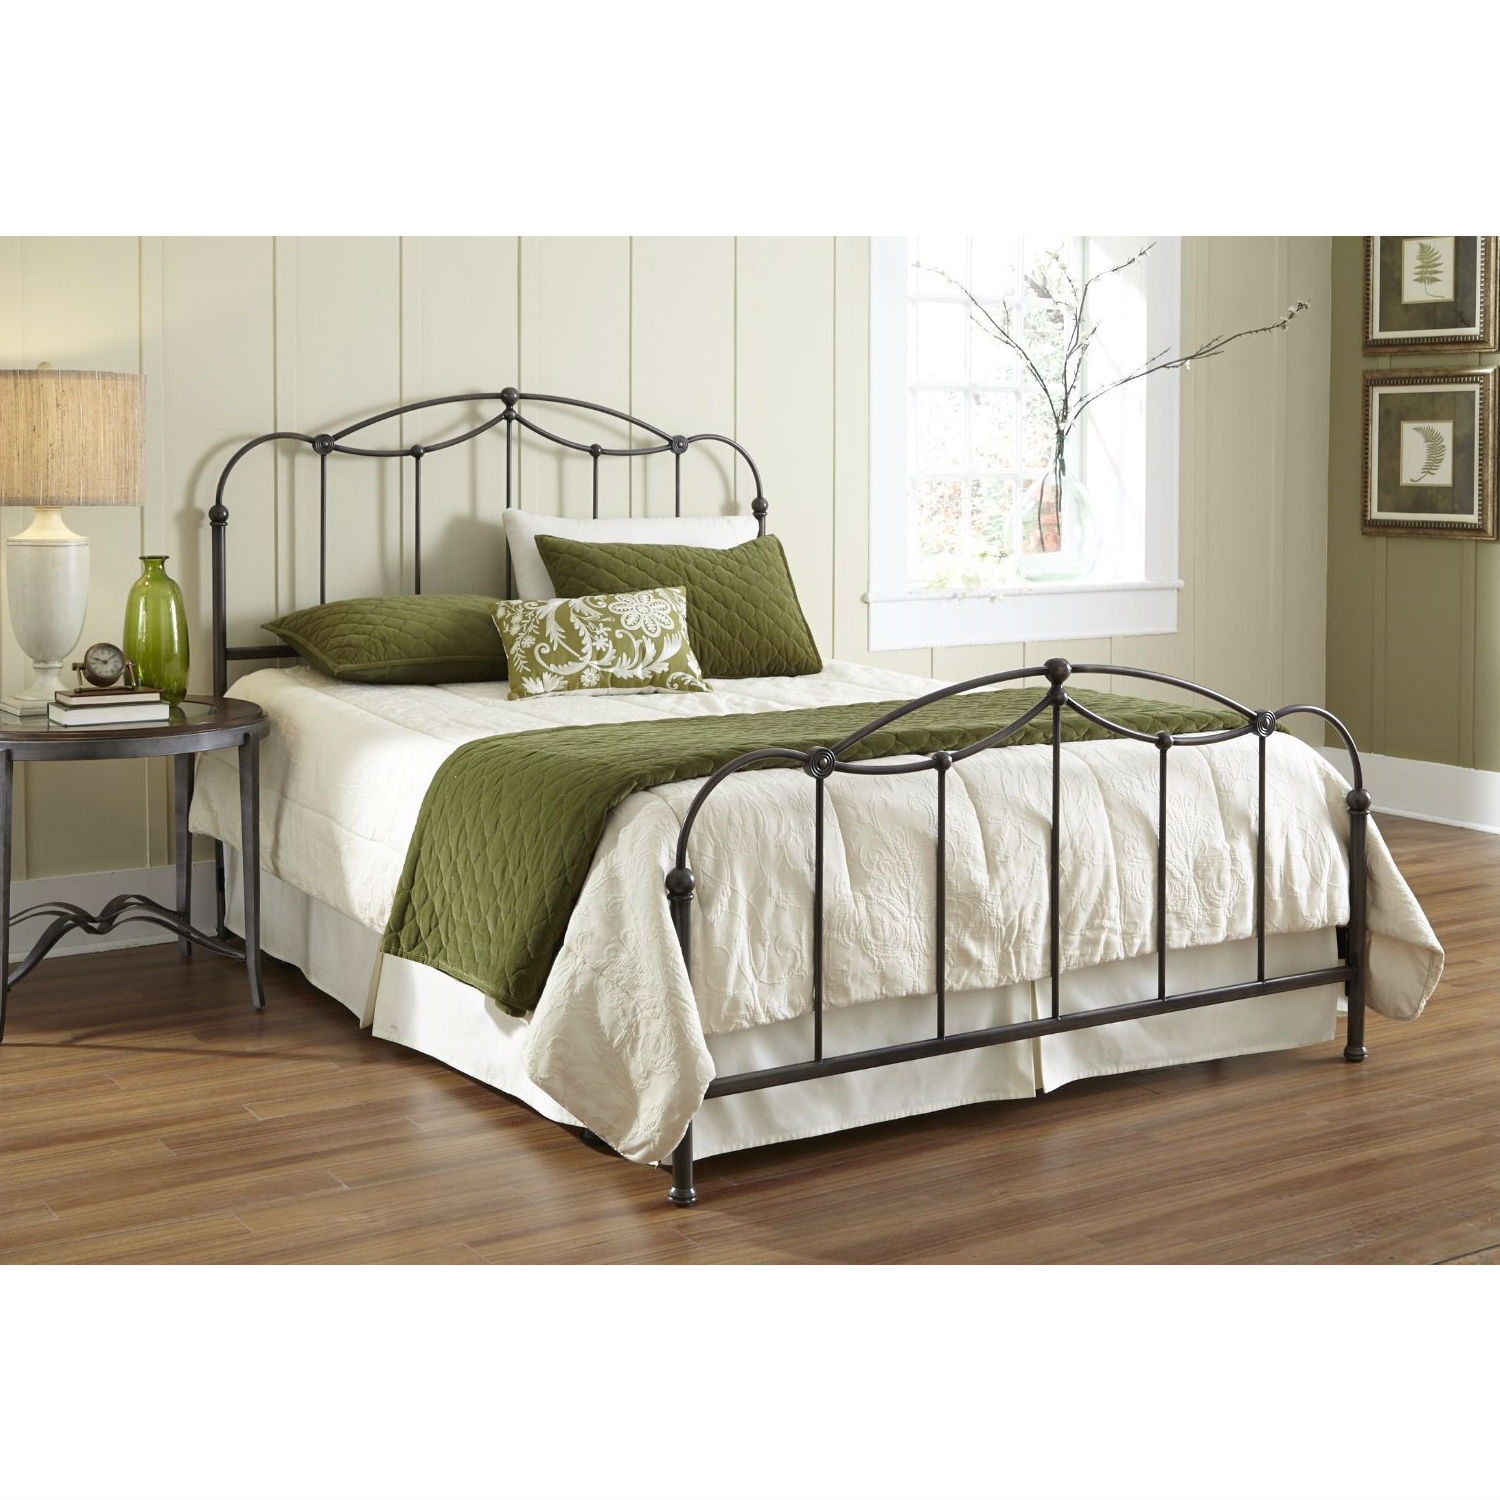 Queen size Metal Bed Frame with Headboard and Footboard - Boxspring Required